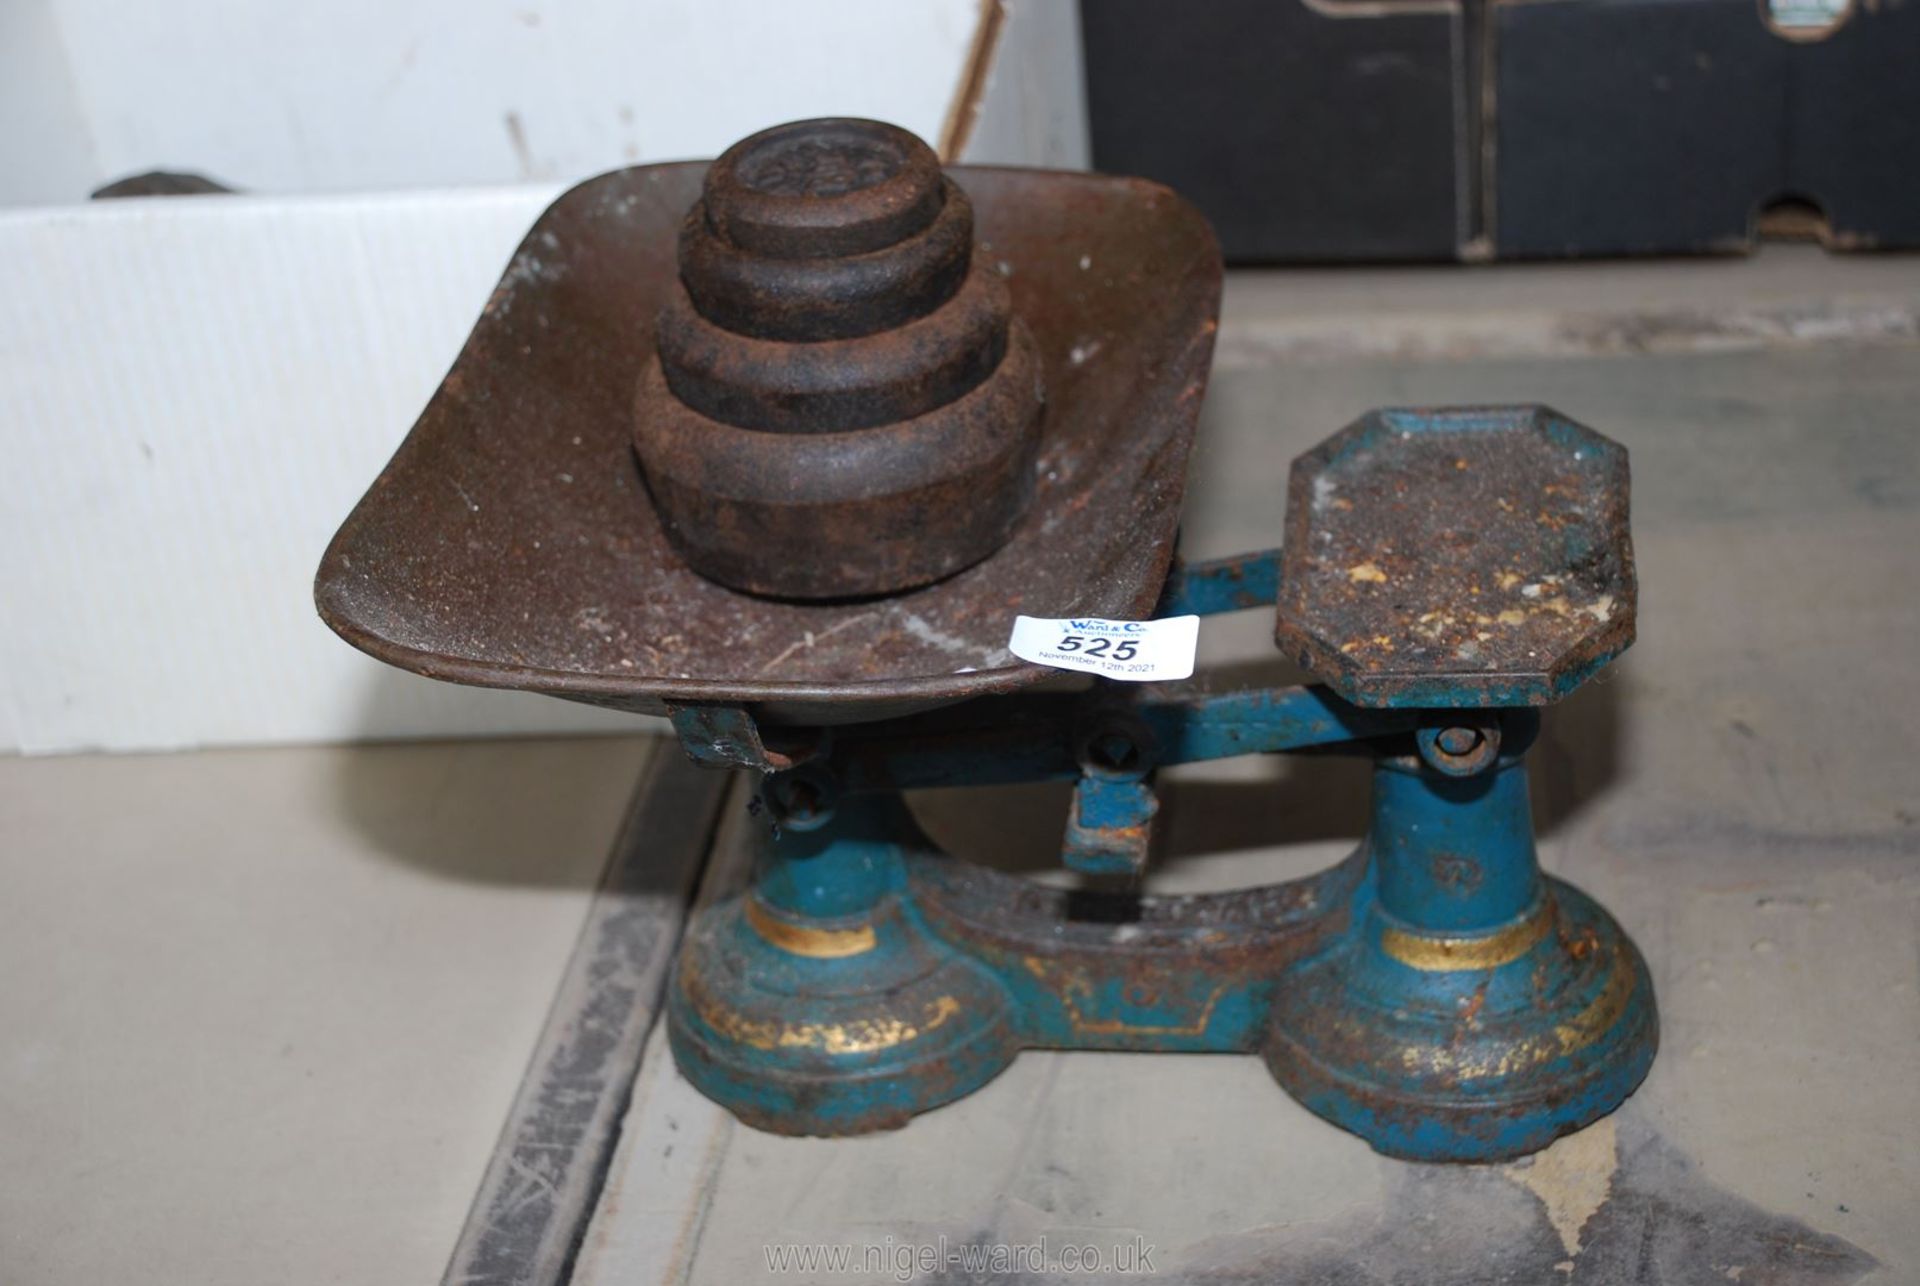 A set of kitchen scales and weights.